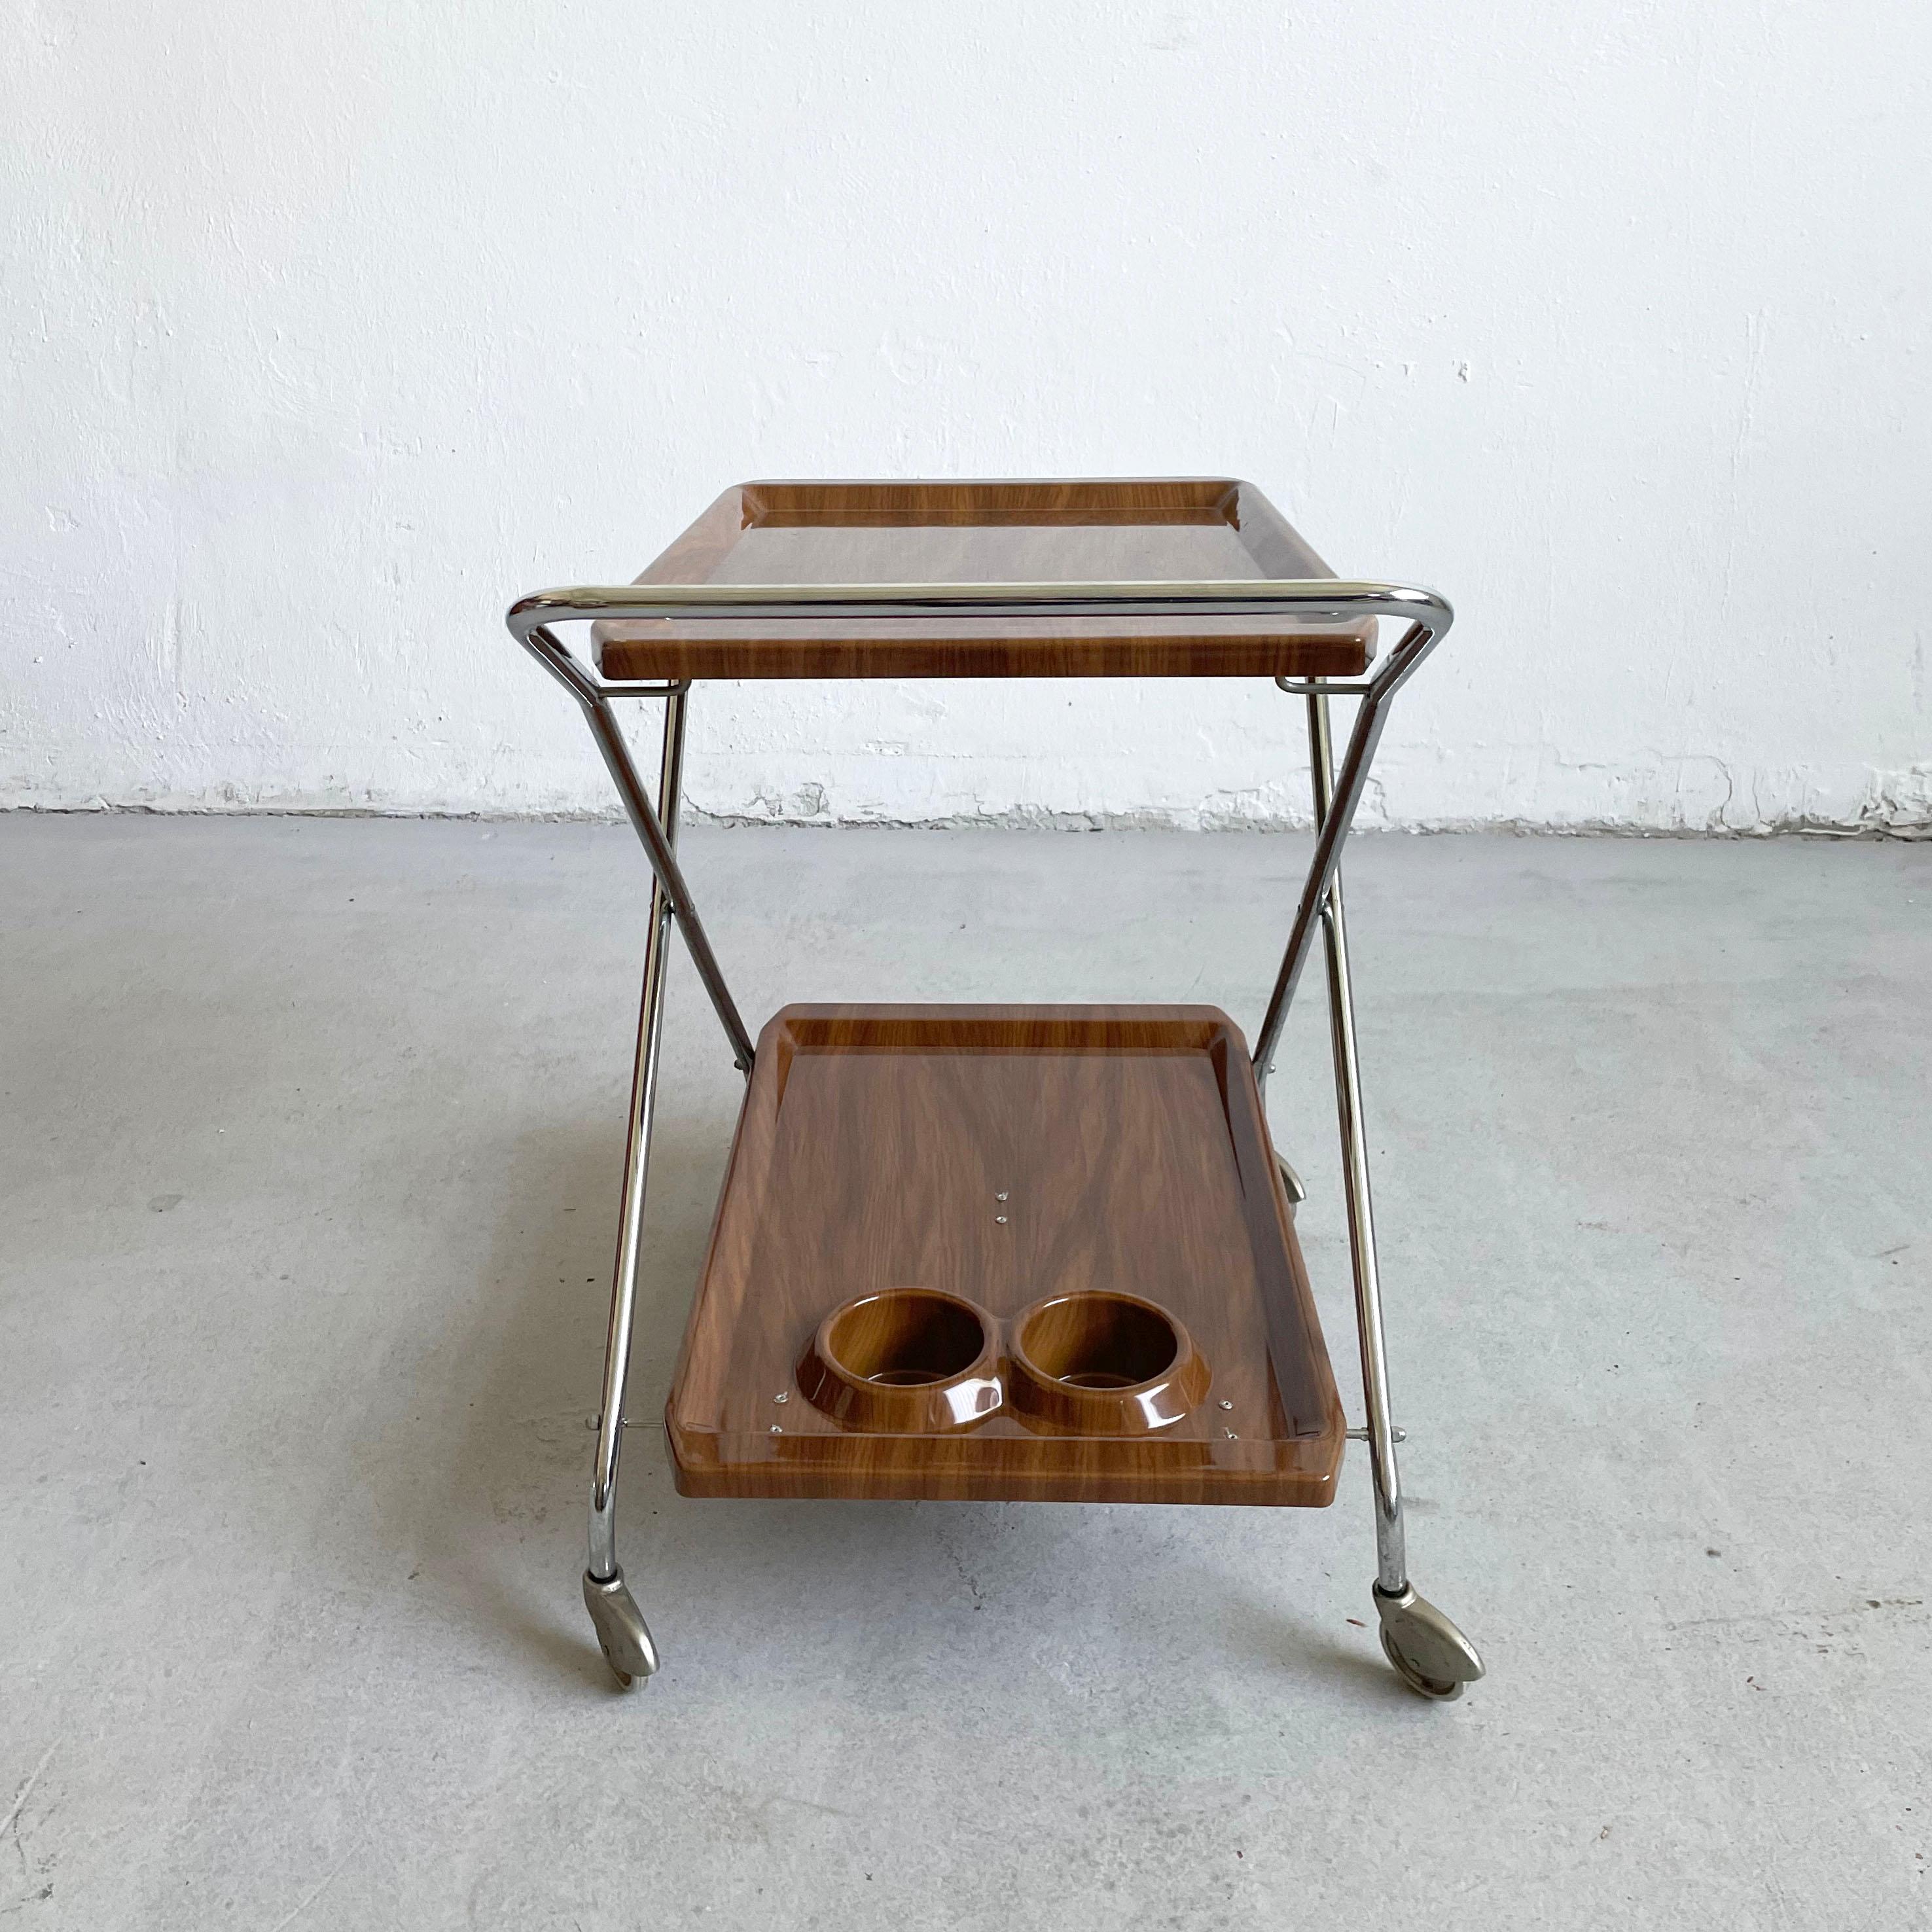 Midcentury Italian Folding Plastic and Chromed Metal Bar Cart, c 1960s In Good Condition For Sale In Zagreb, HR